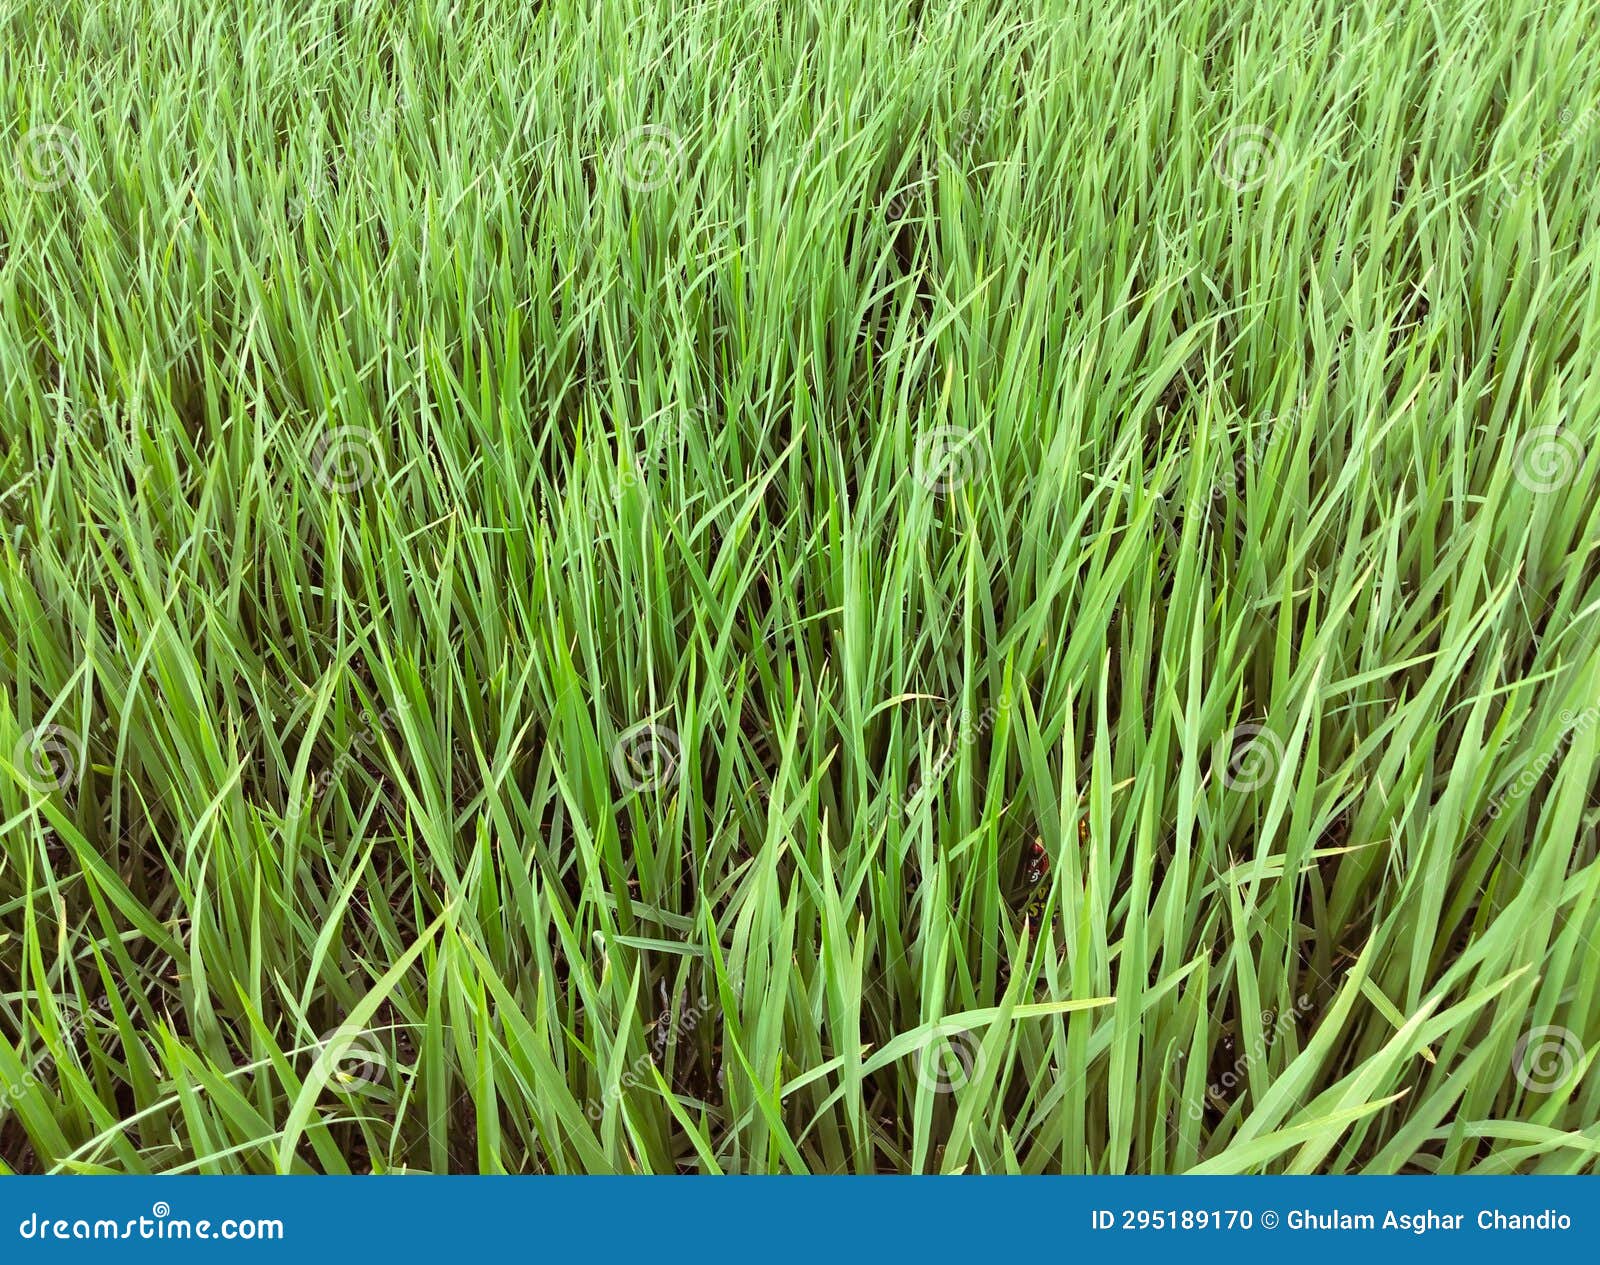 rice crop plants in early stage agriculture farm field green paddy dhan recolte riz colheita-arroz cultivo  arroz  photo